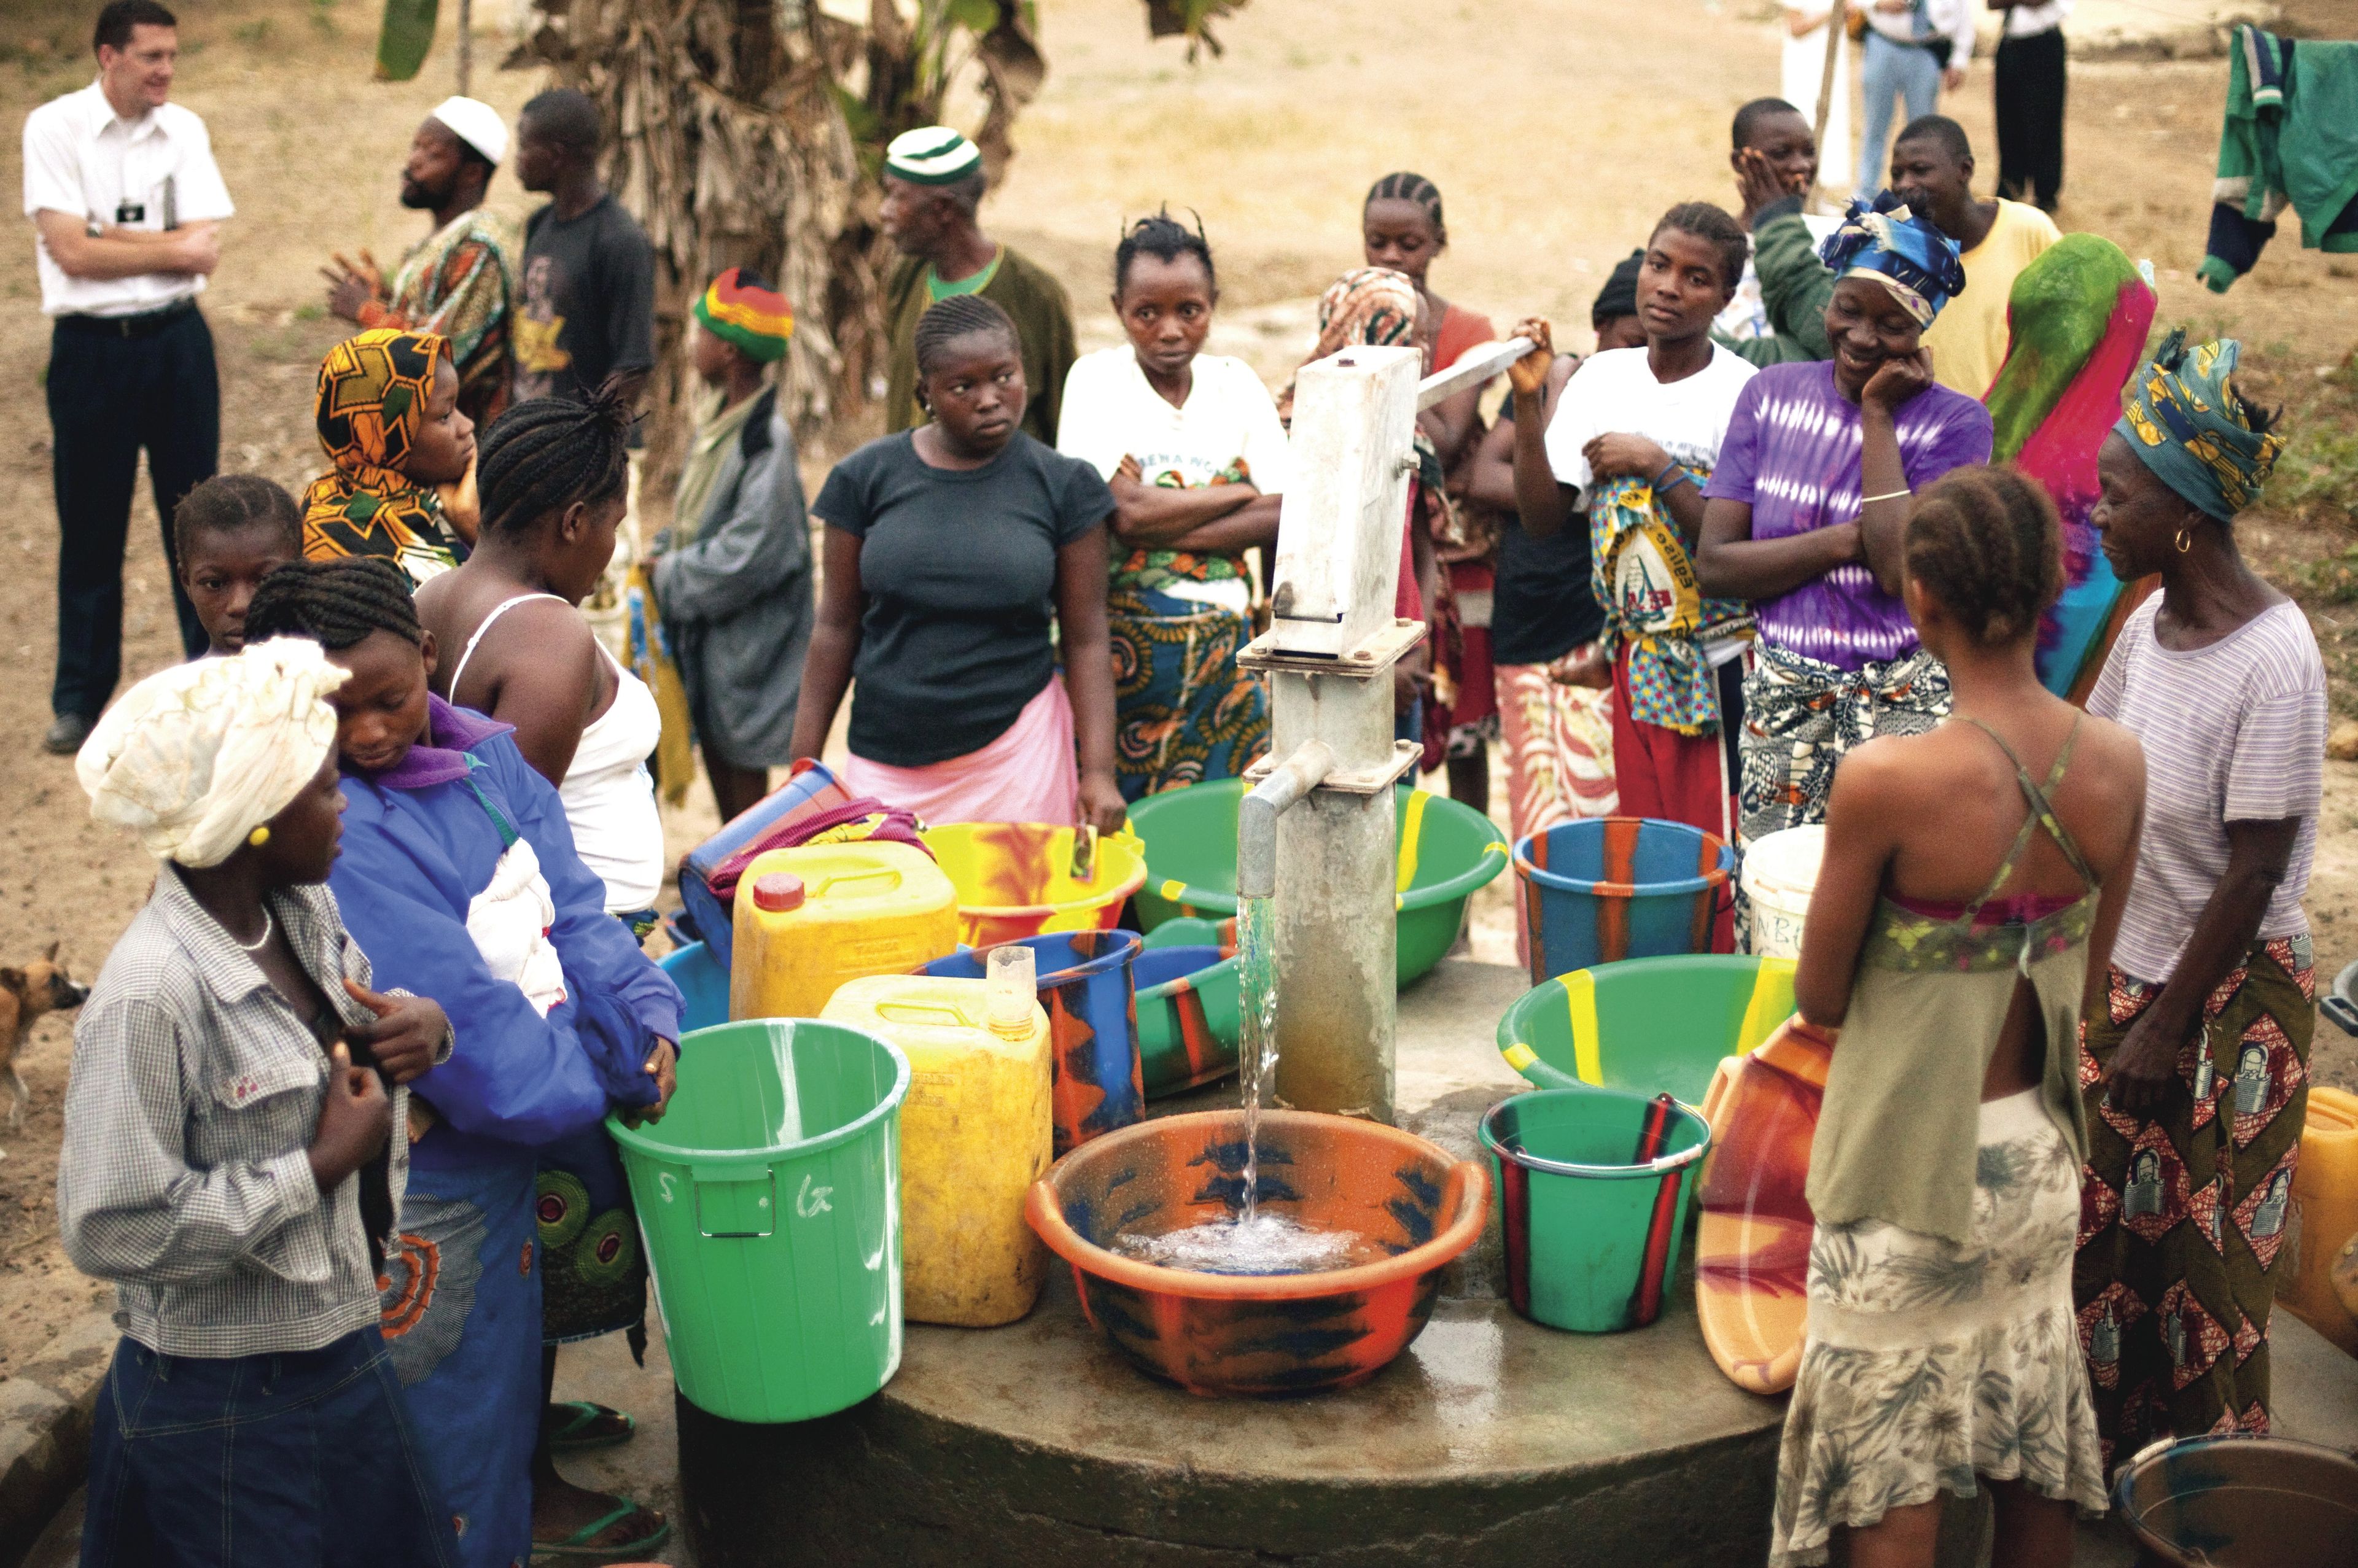 A group of people in Africa waiting to use the hand-operated water pump.